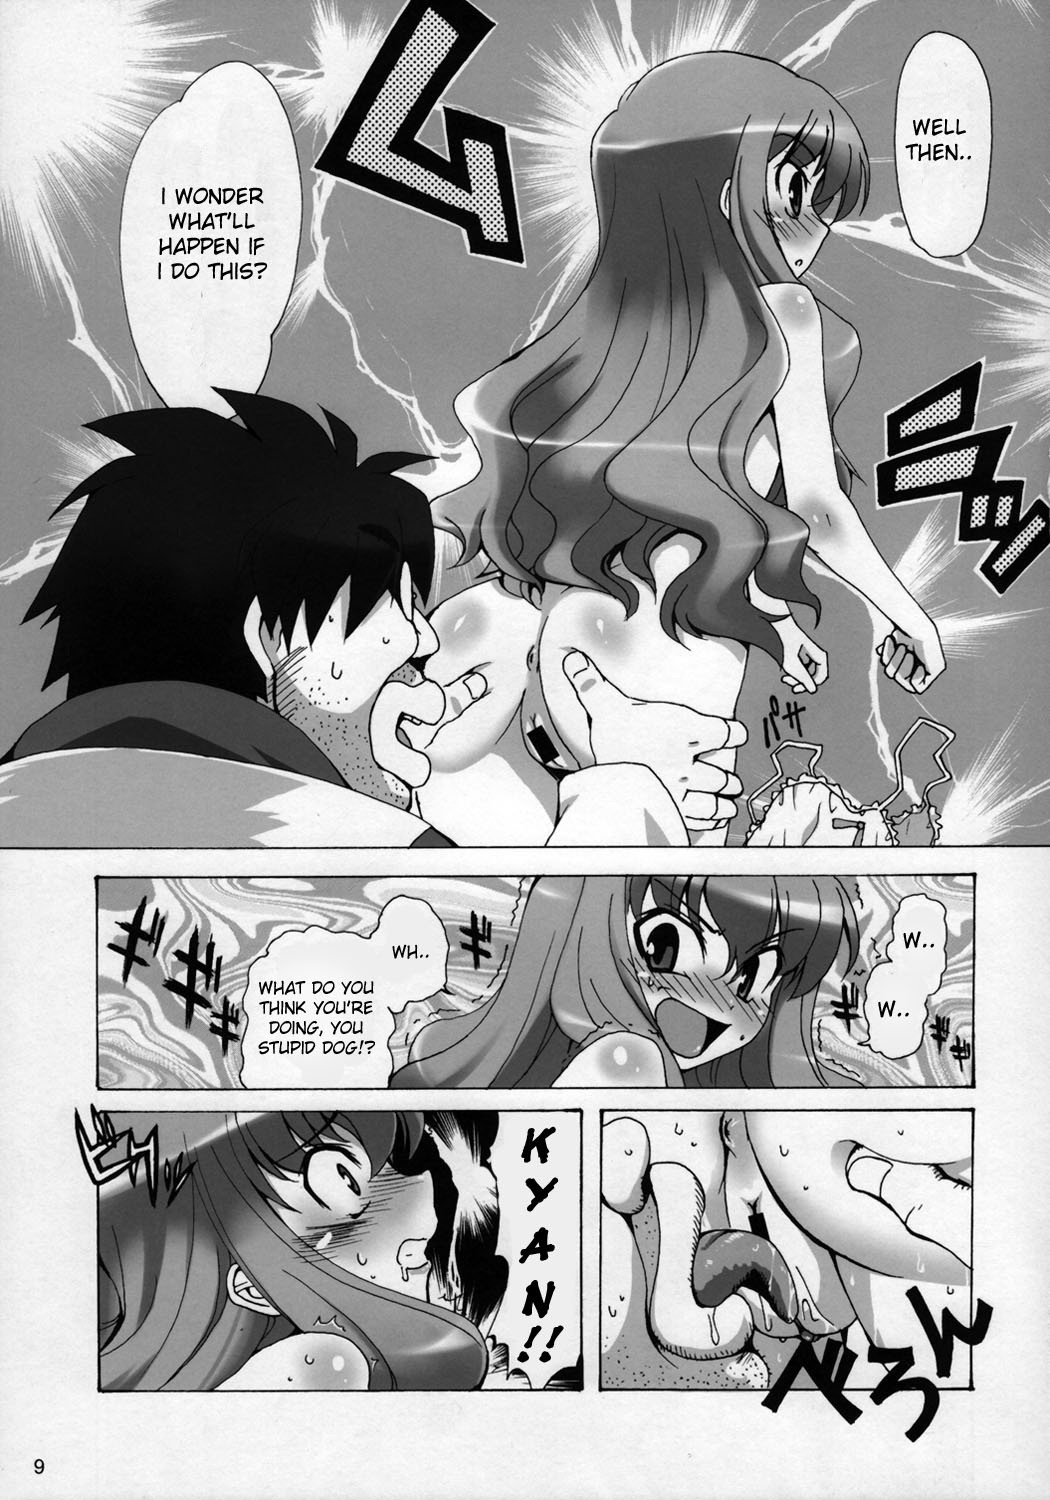 I Will Have Sex With Louise hentai manga picture 8